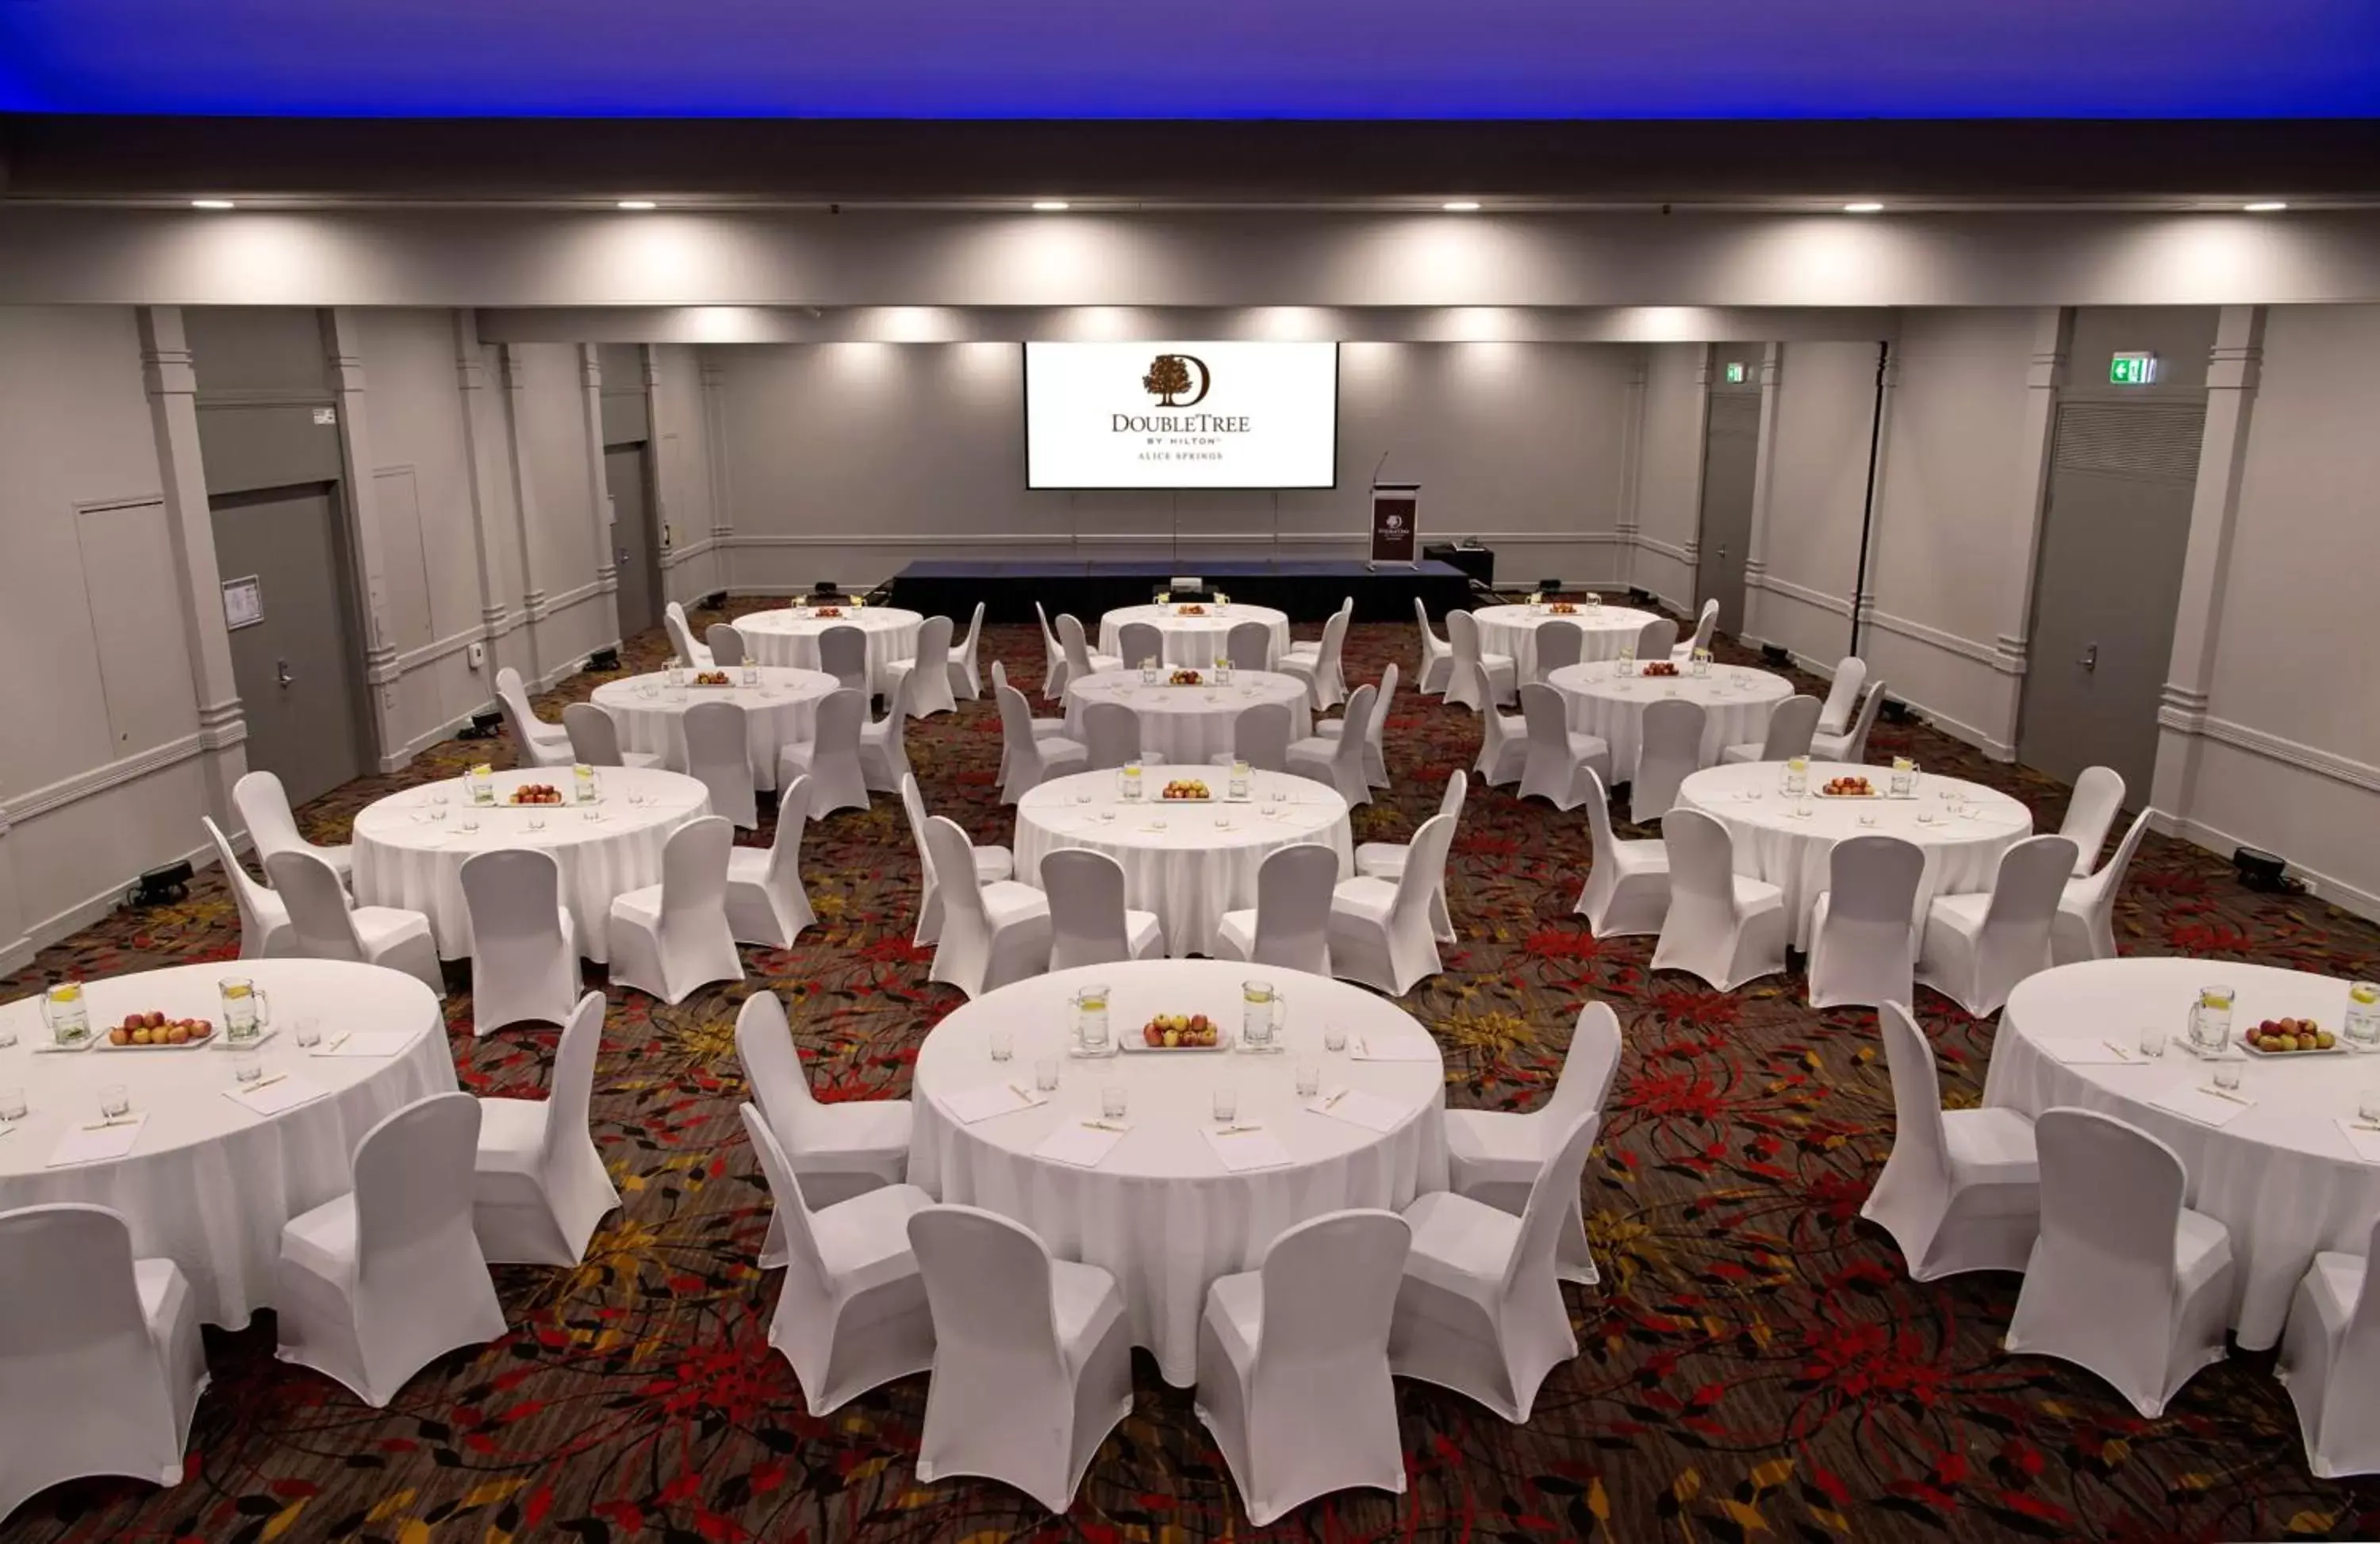 Meeting/conference room, Banquet Facilities in DoubleTree By Hilton Alice Springs